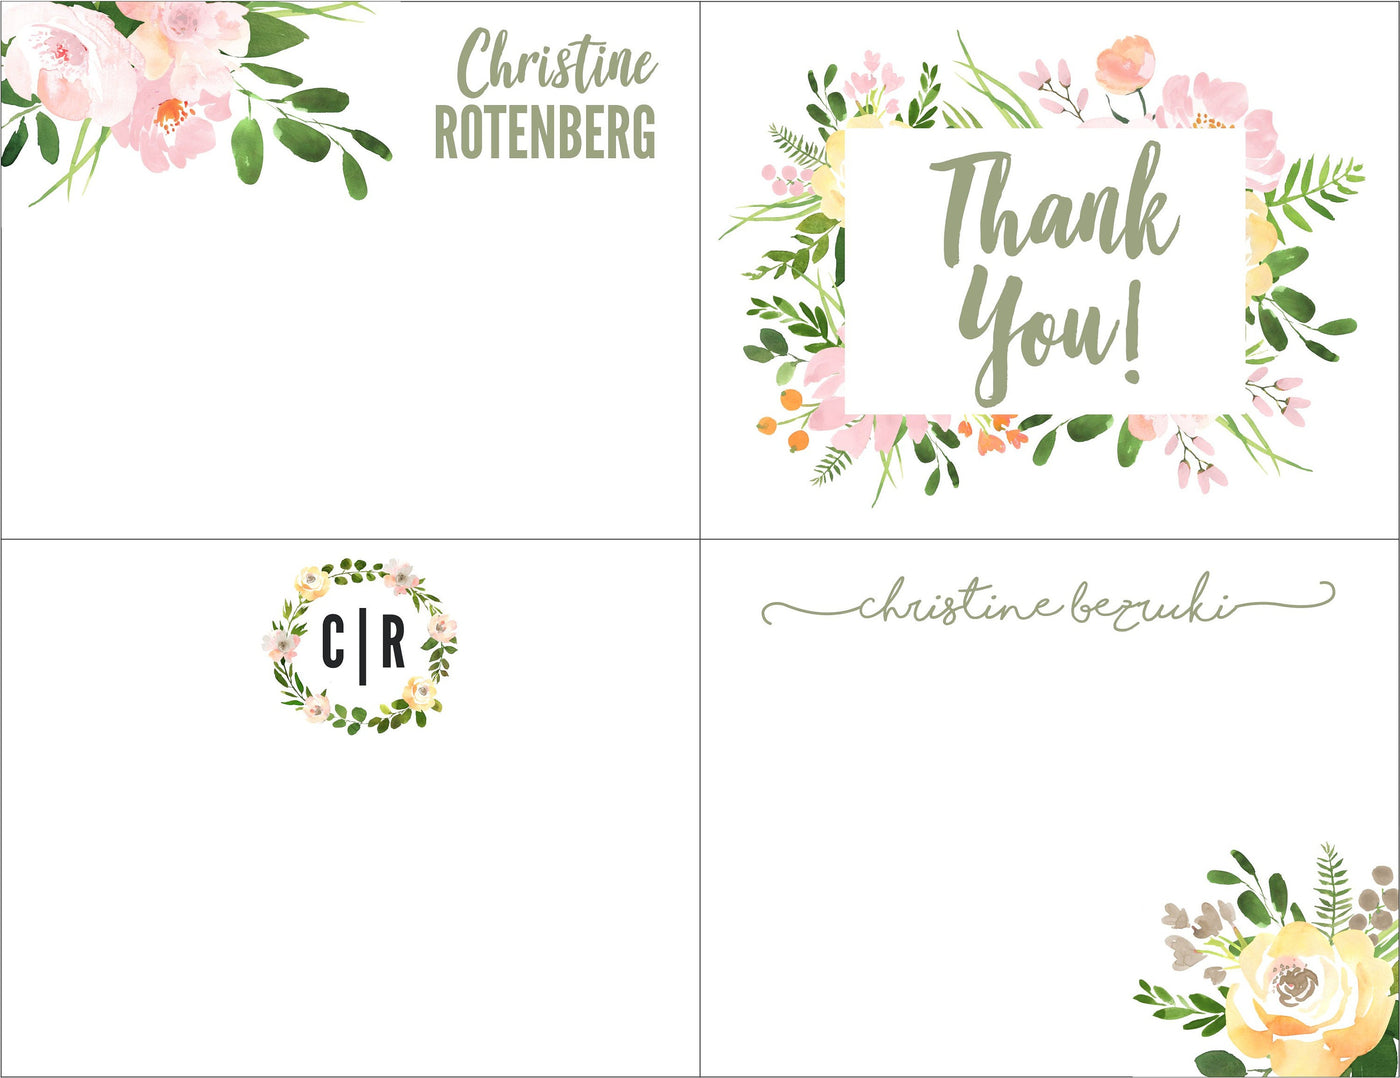 Personalized Stationery, Stationary Cards, Teacher Gift, Stationary Personalized, Stationary Set, Floral Stationery, Personalized Note Card